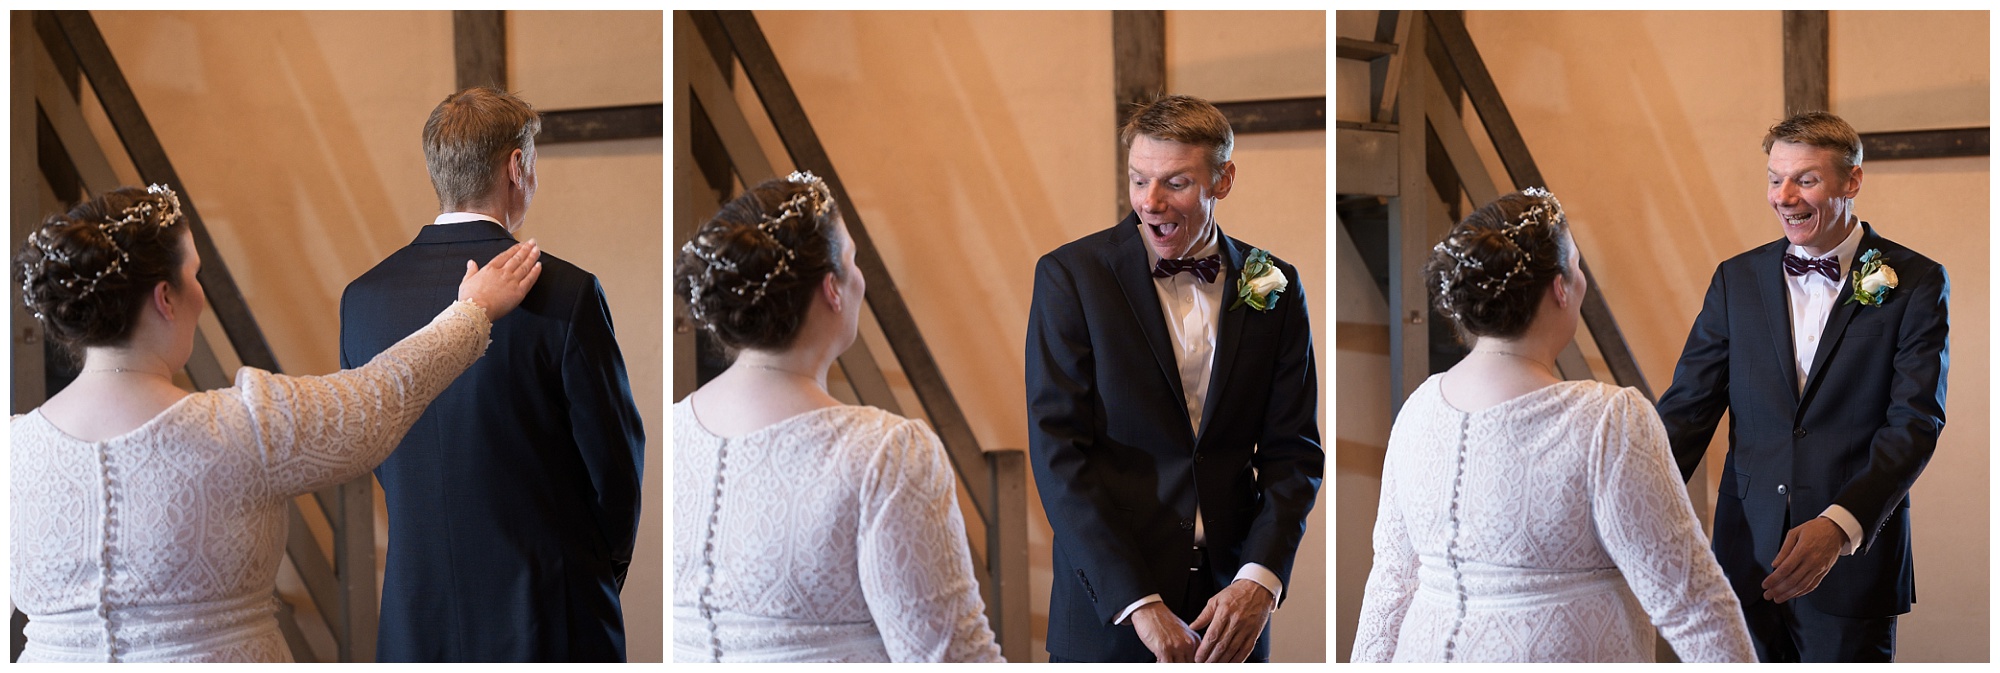 Series of Groom seeing Bride for the first time in the Das Bevo Loft